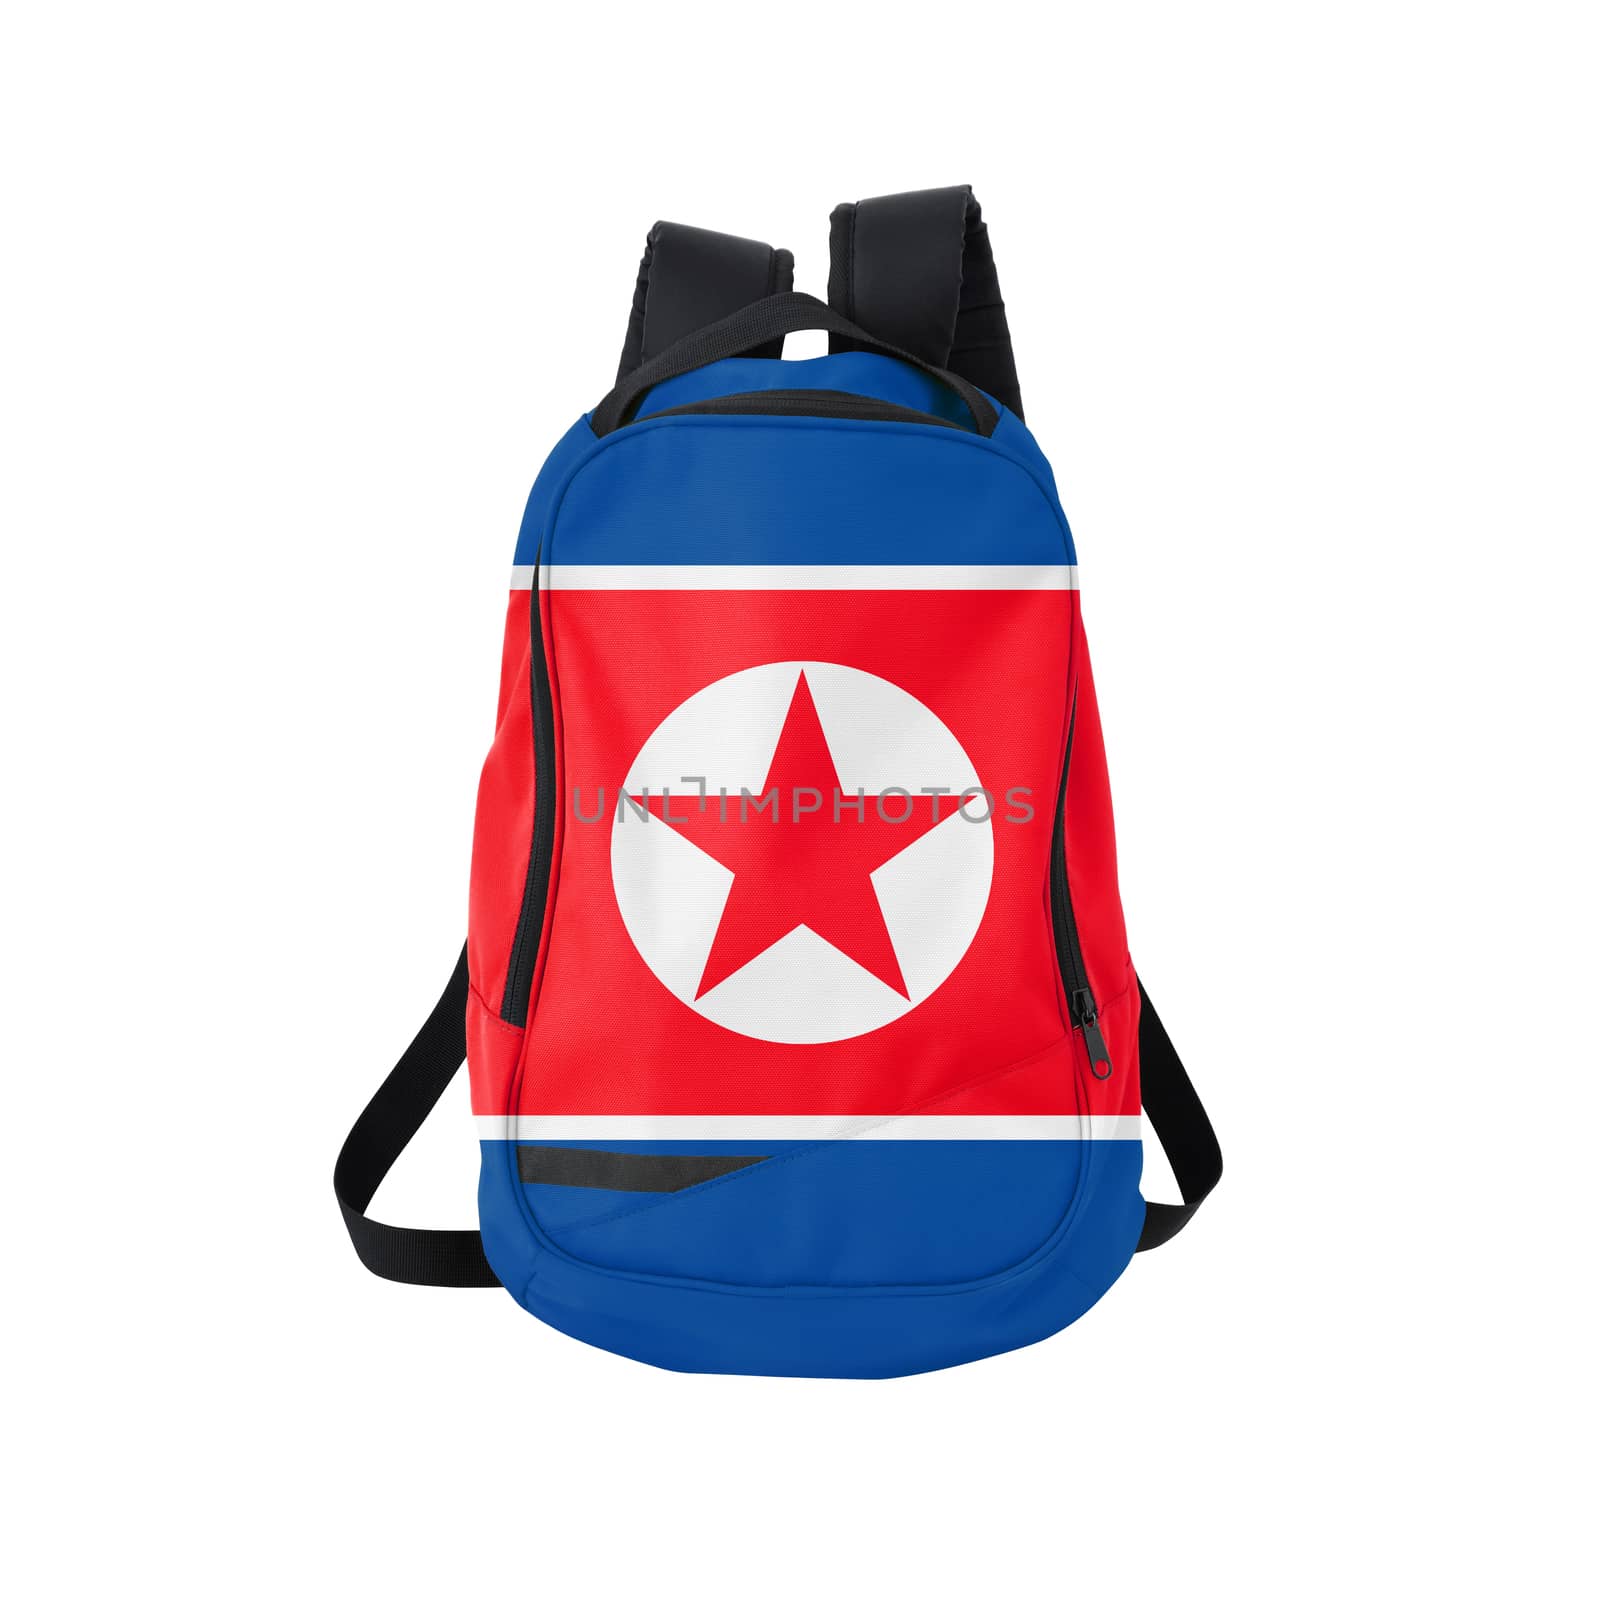 North Korea flag backpack isolated on white by kravcs